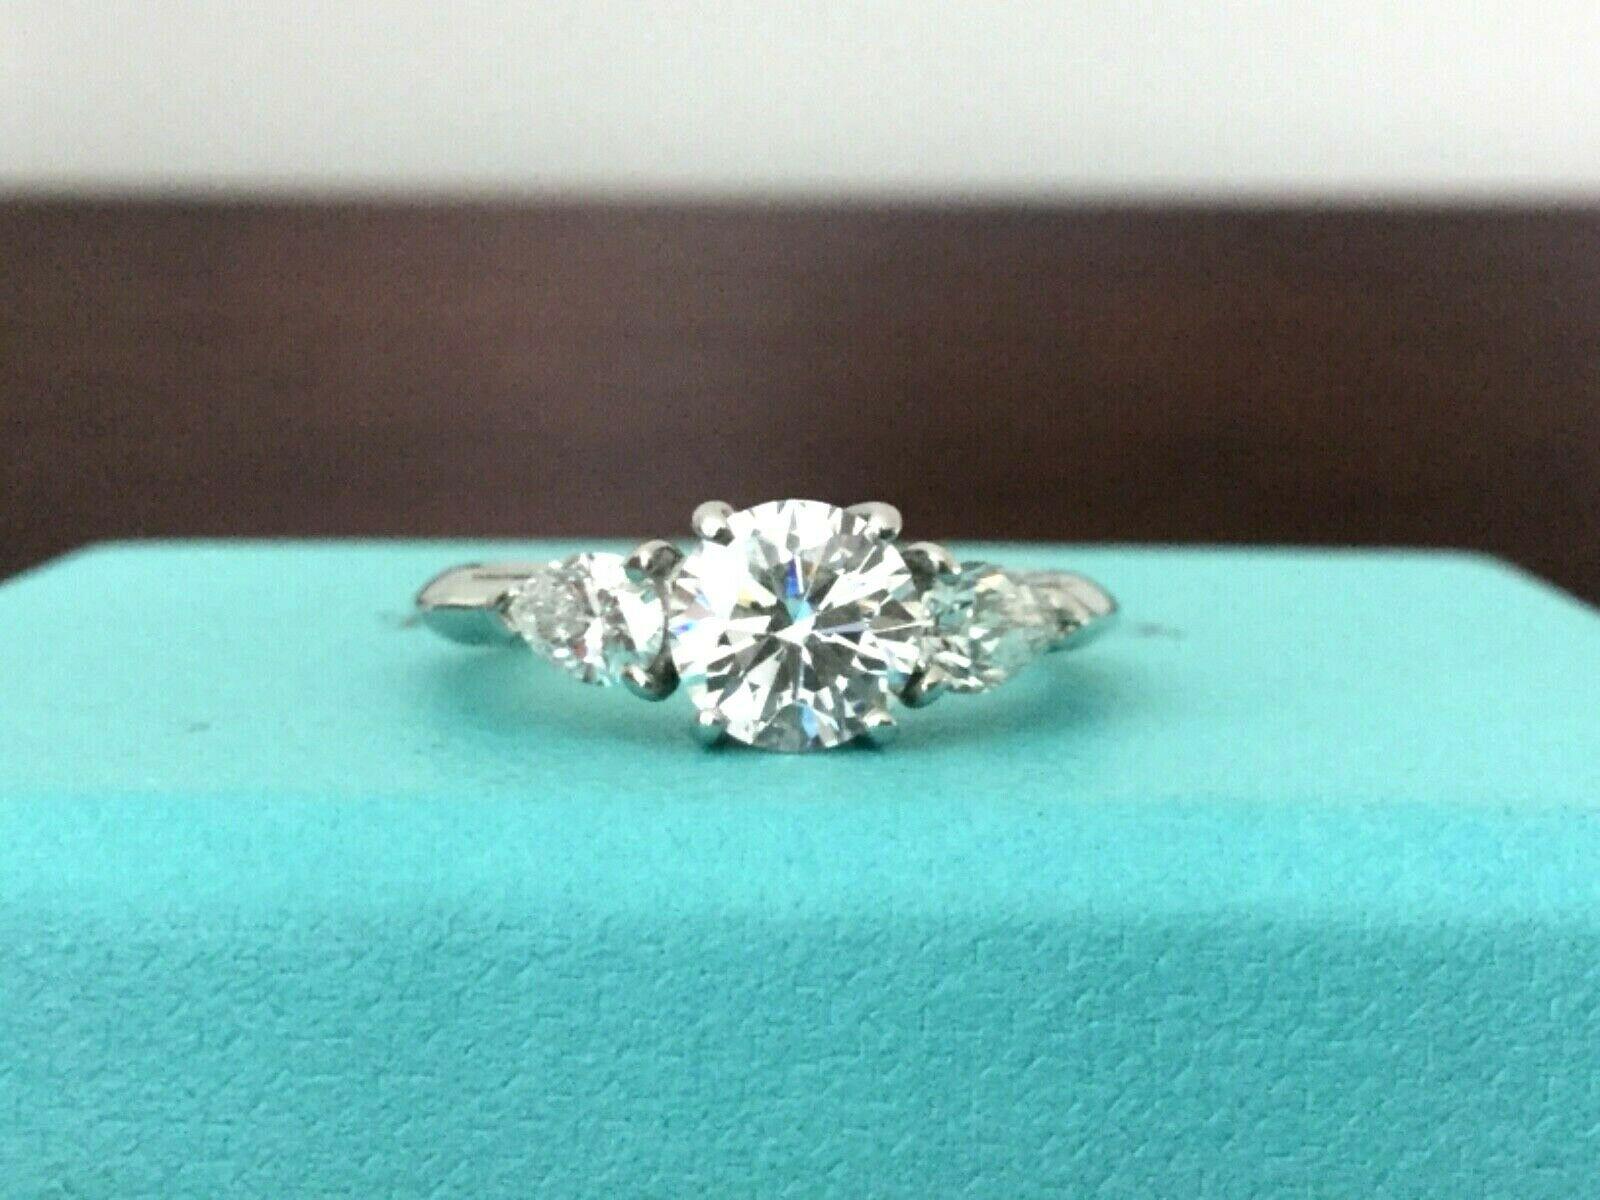 Being offered for your consideration is a stunning 3 stone Round and Pear Shaped Side Diamond Tiffany & Co engagement ring or anniversaryring.  This ring can be paired with another or worn as a cocktail ring or anniversary band - it is extremely